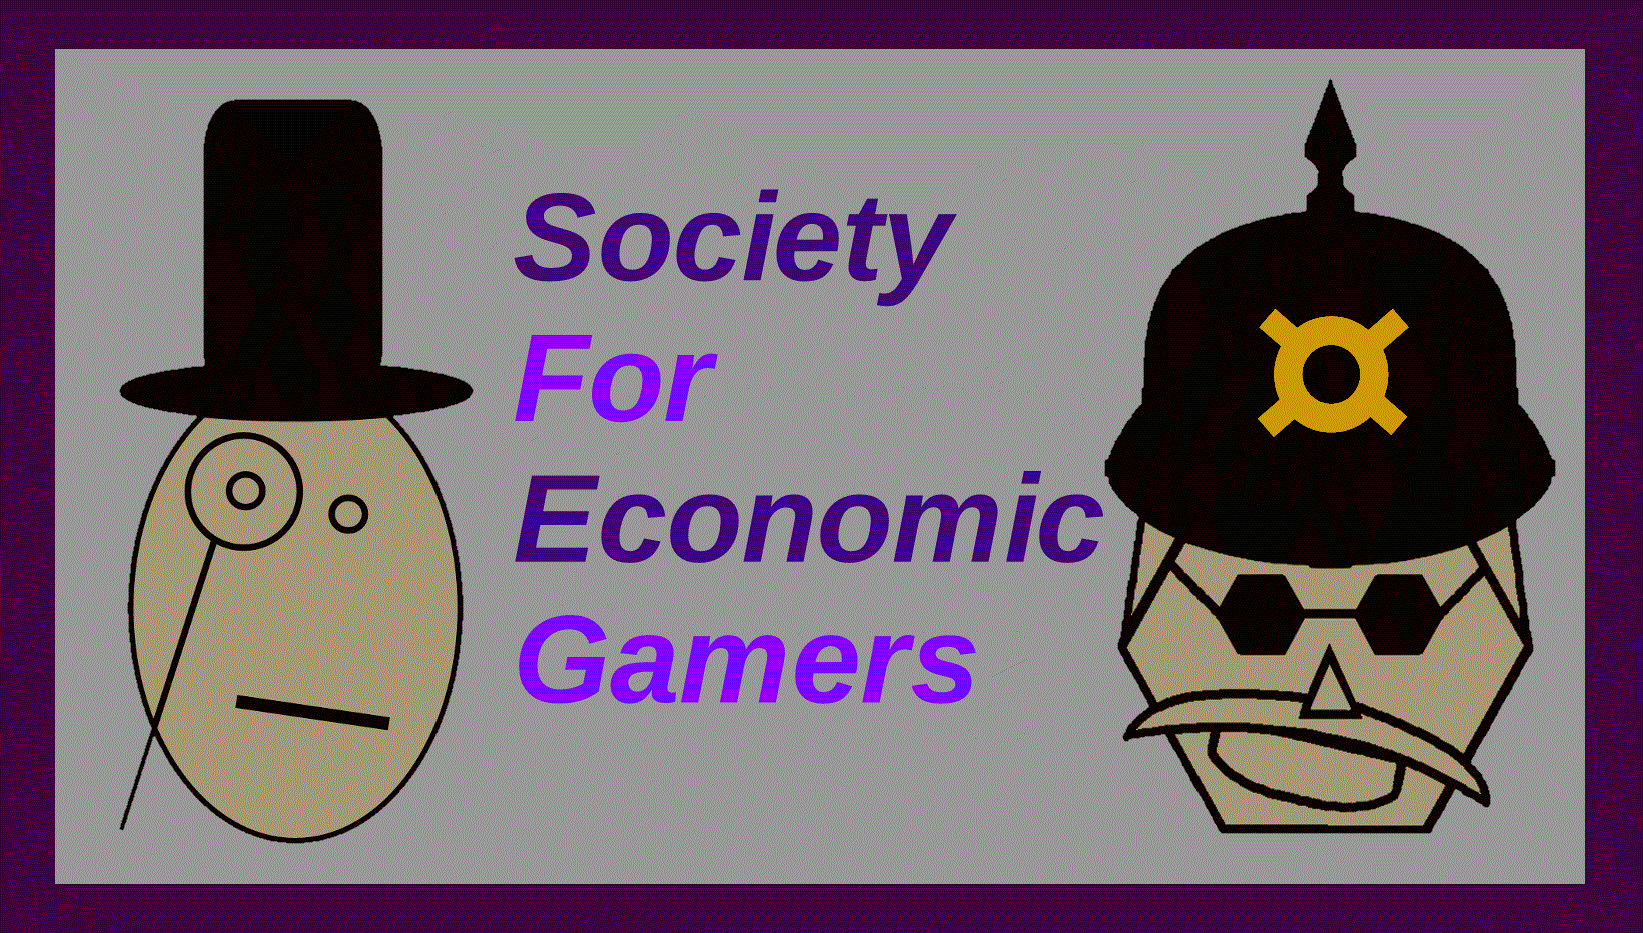 Society For Economic Gamers